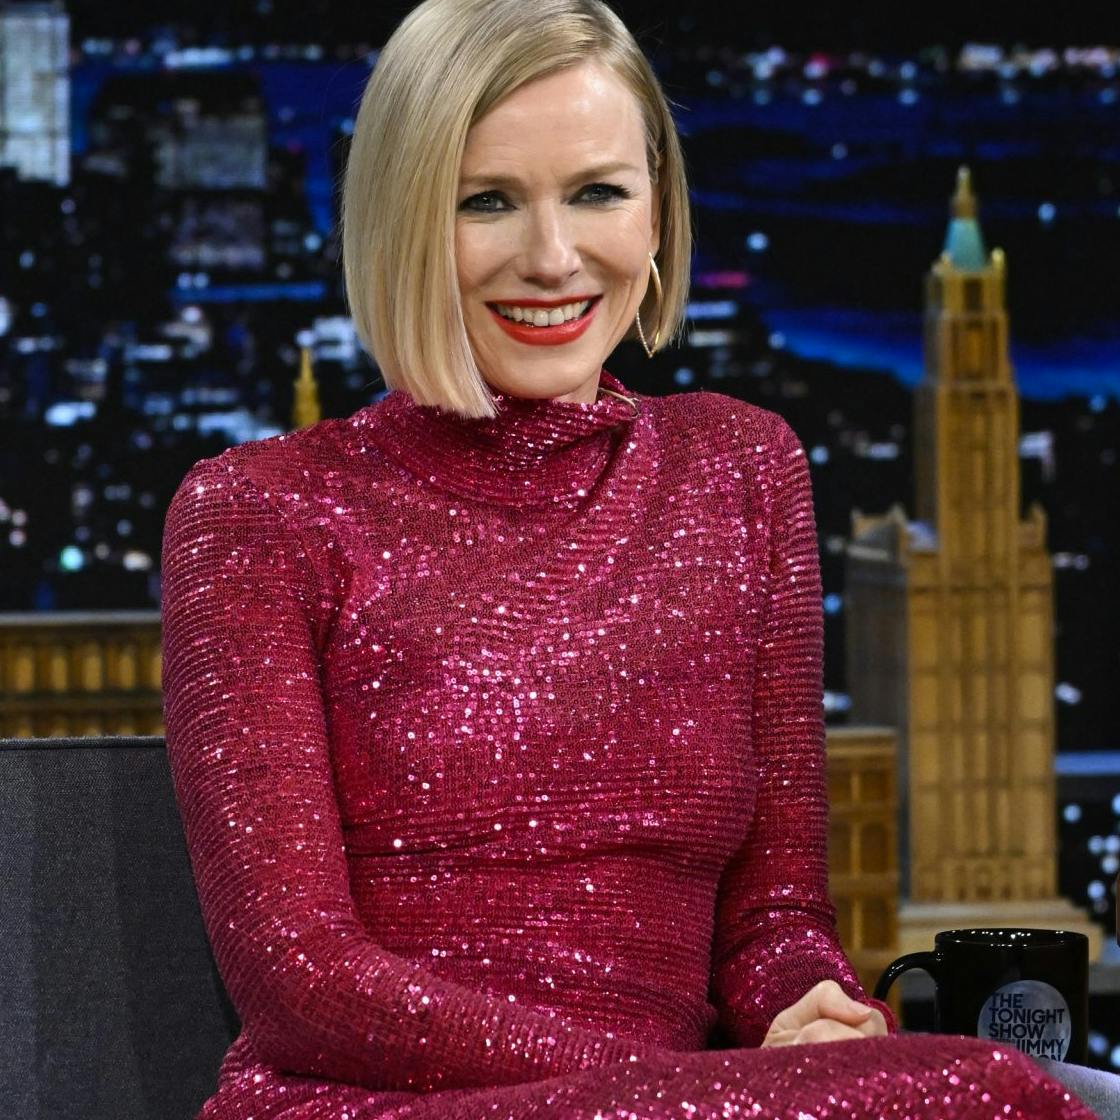 Naomi Watts reveals she was told she'd “become unf***able” at 40